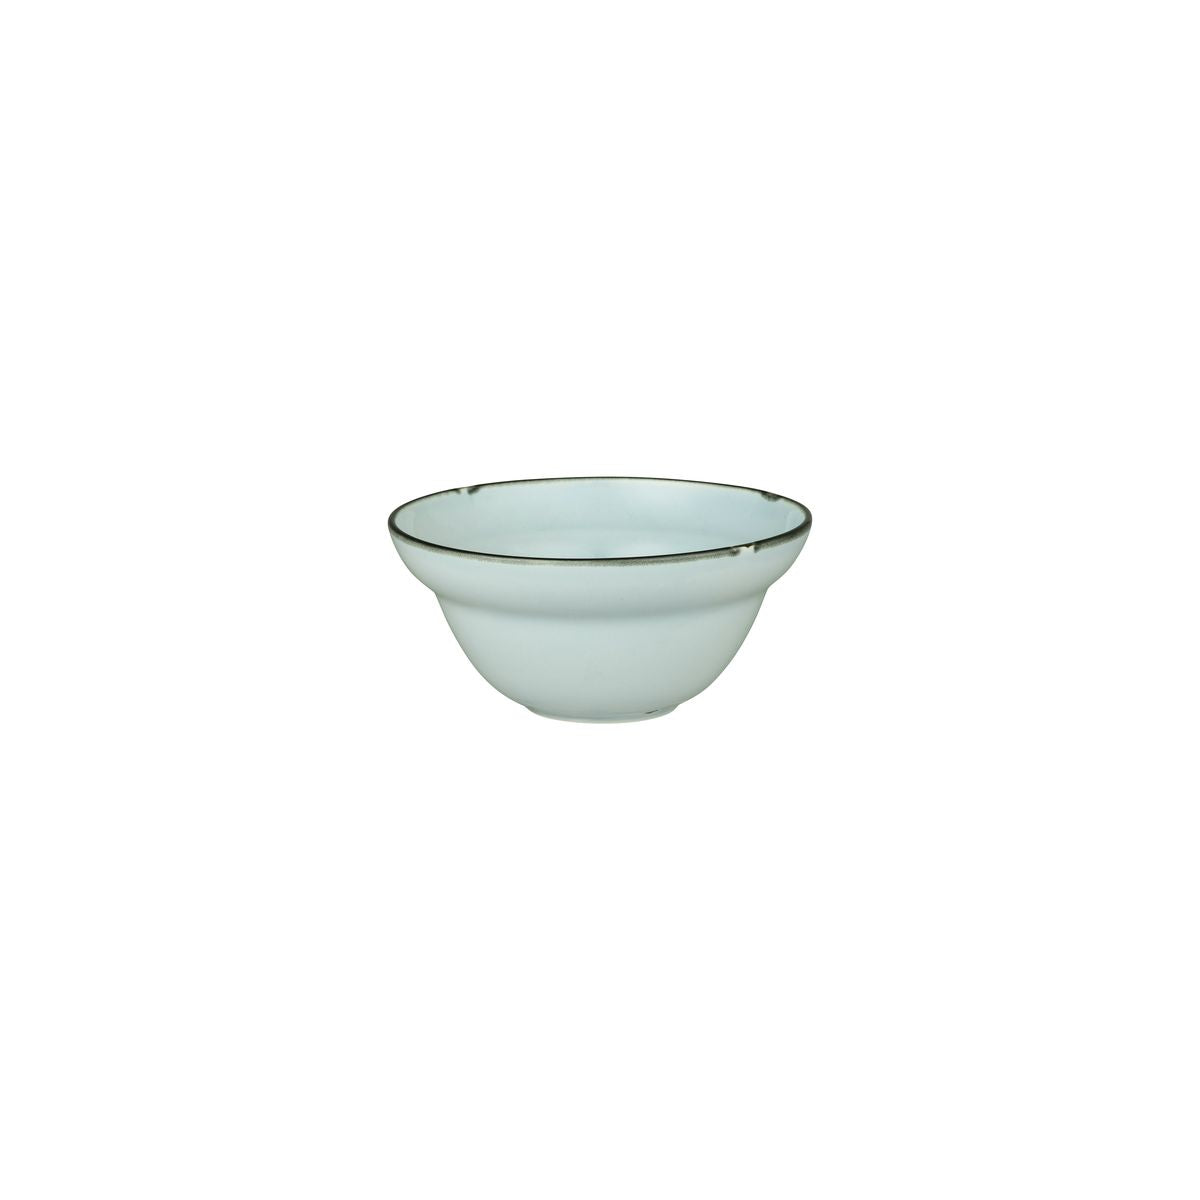 Round Bowl - 150mm, Tintin Blue & Black from Luzerne. made out of Ceramic and sold in boxes of 12. Hospitality quality at wholesale price with The Flying Fork! 